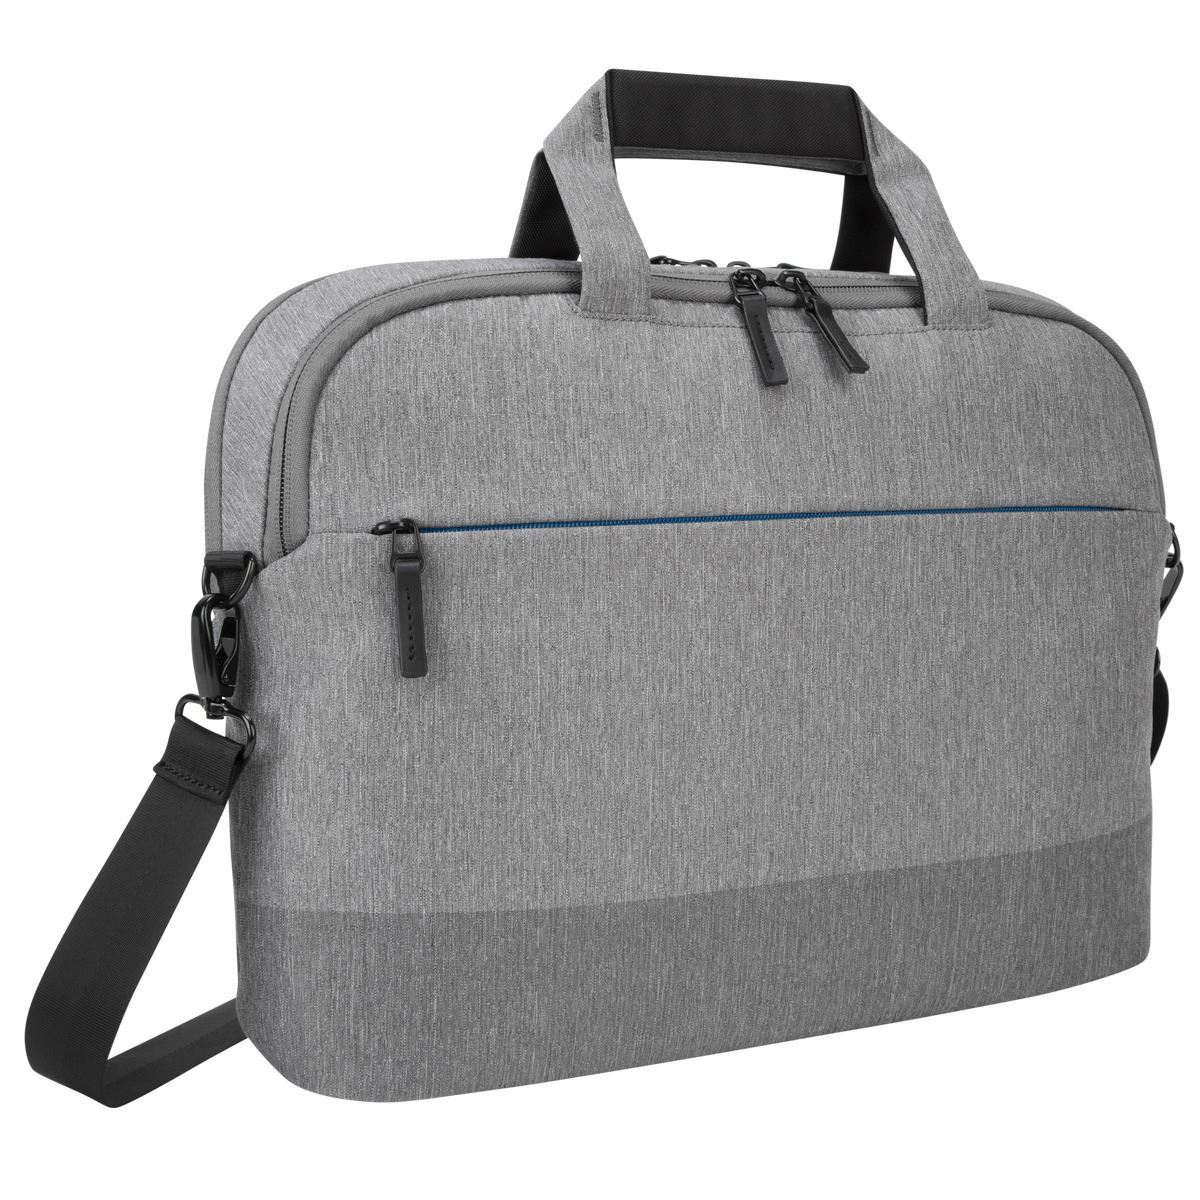 TechProtect Work-In Case w/Pocket-for 11-12 inch Chromebook/MacBook/Laptop  TP-BK-CC11 - Best Buy